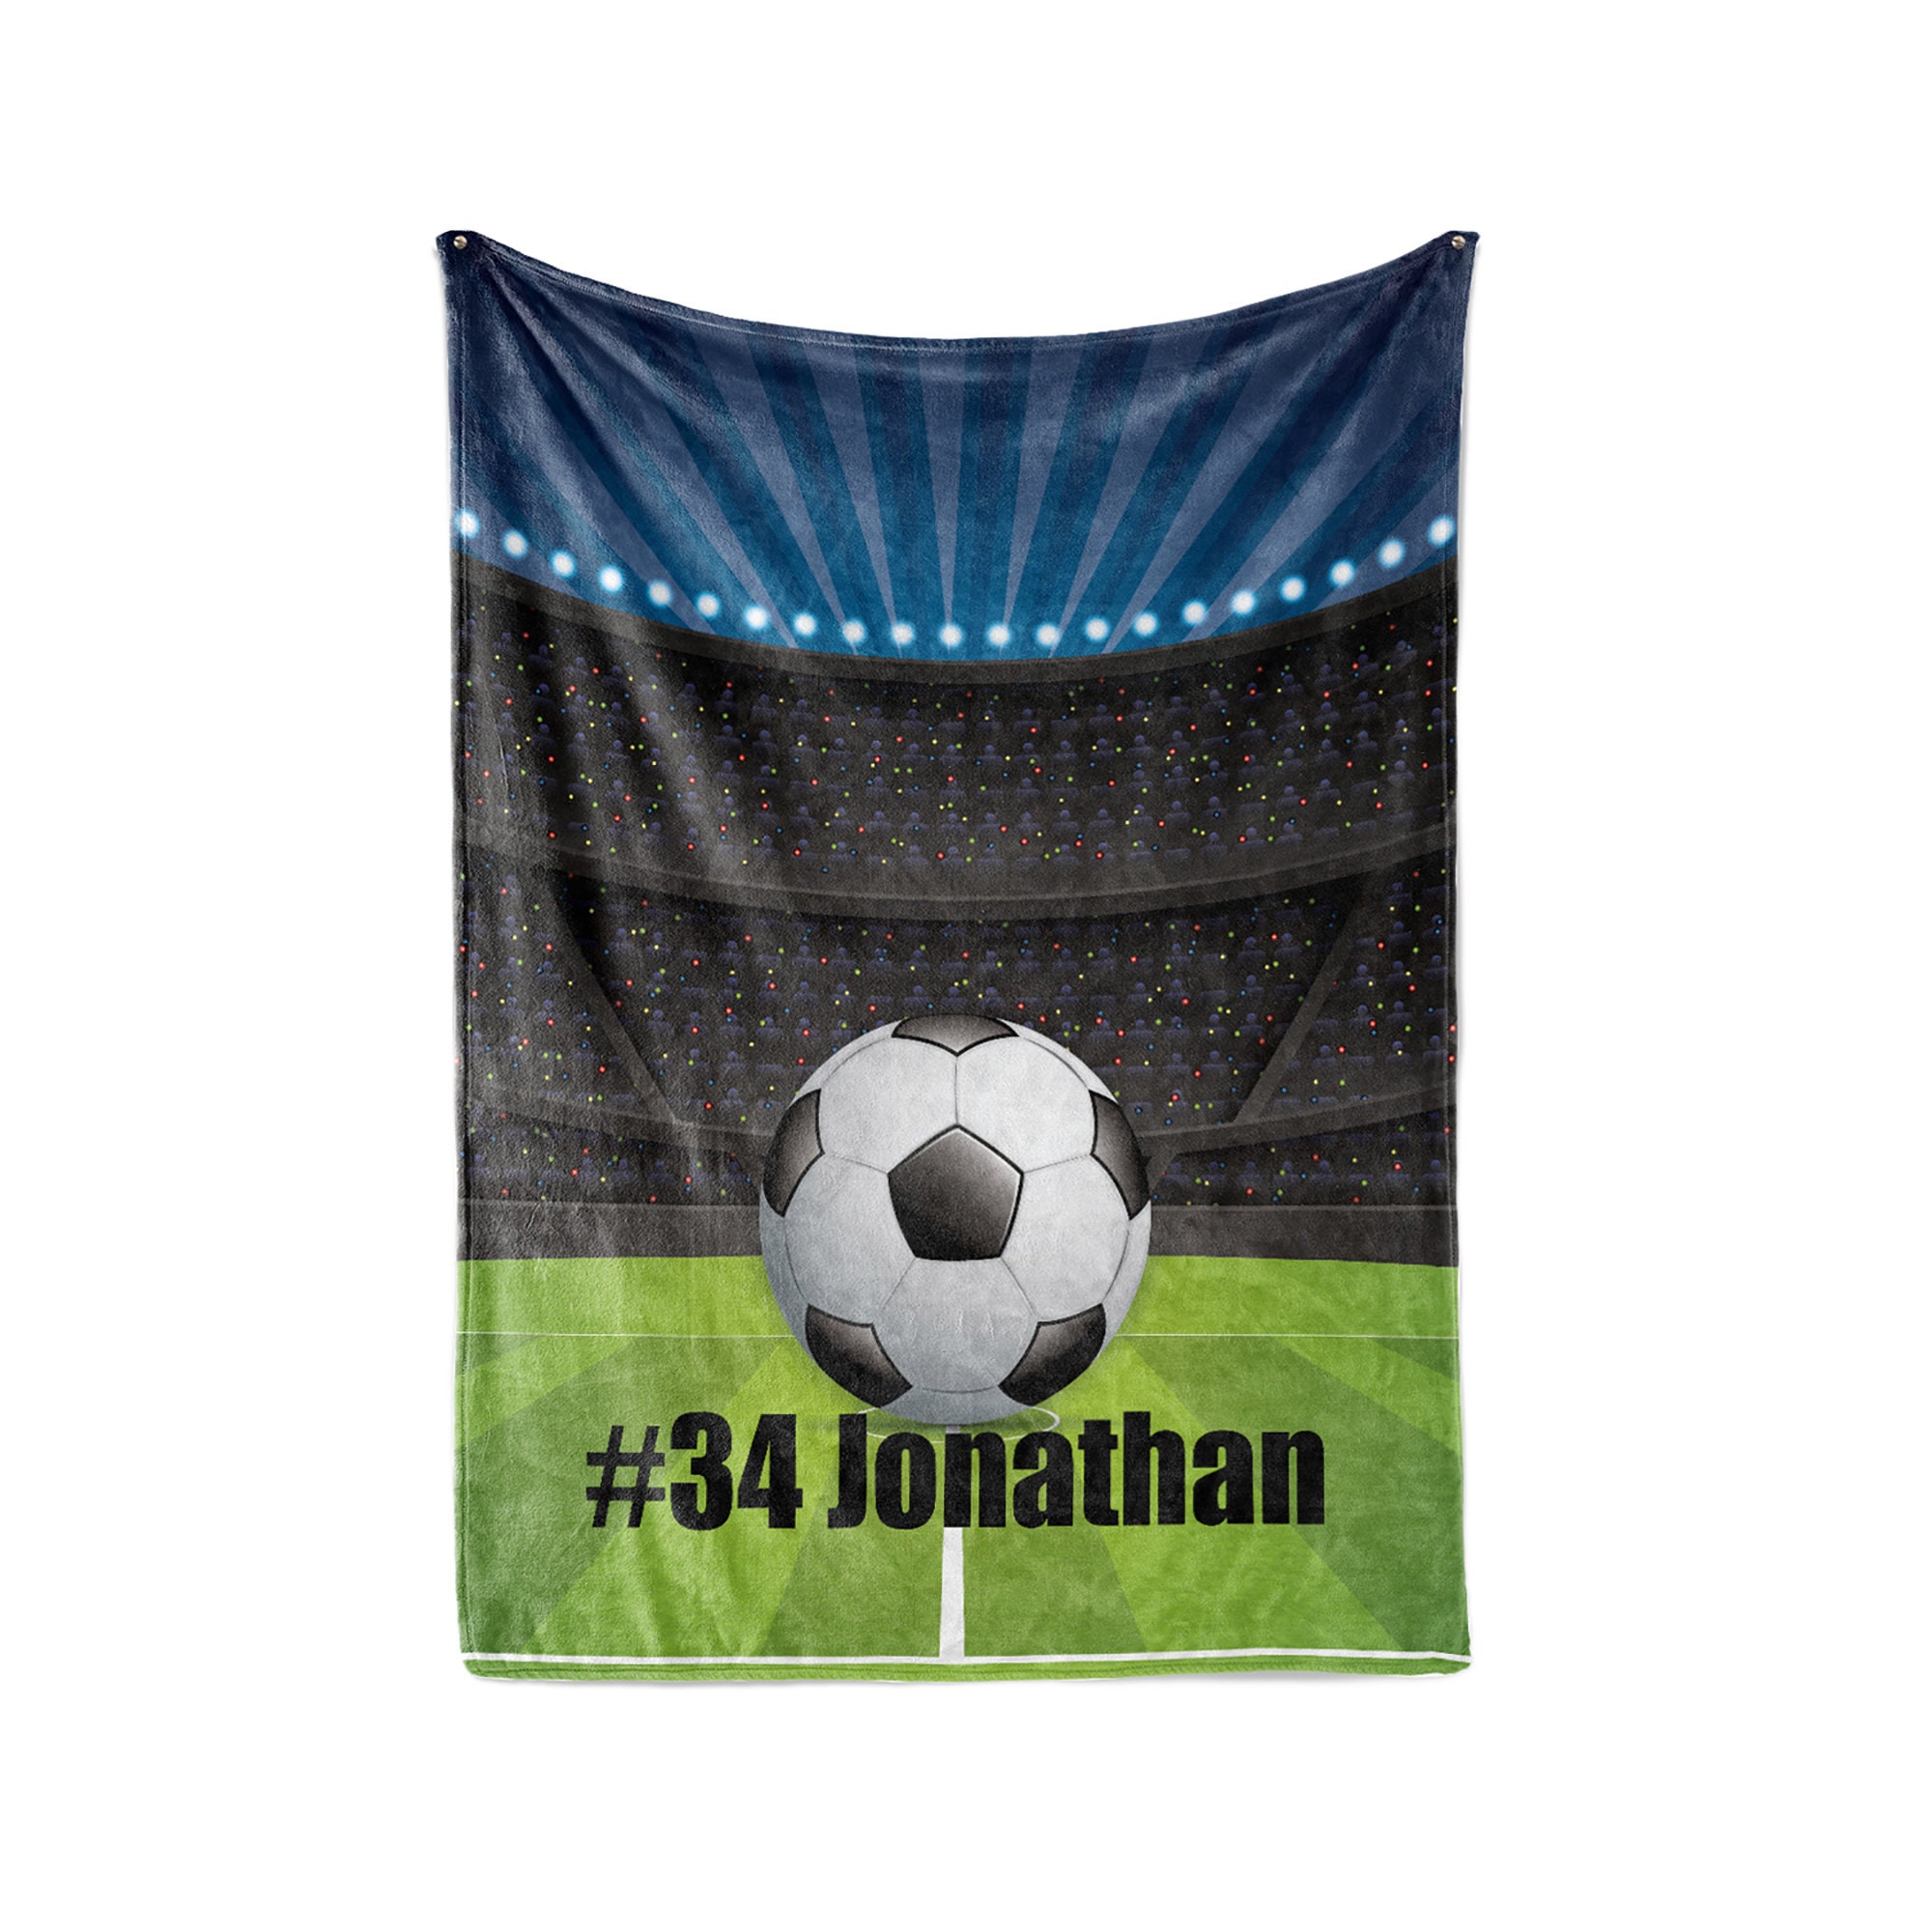 Kids Soccer Team - Personalized Custom Fleece and Sherpa Blankets with Your Child's Name